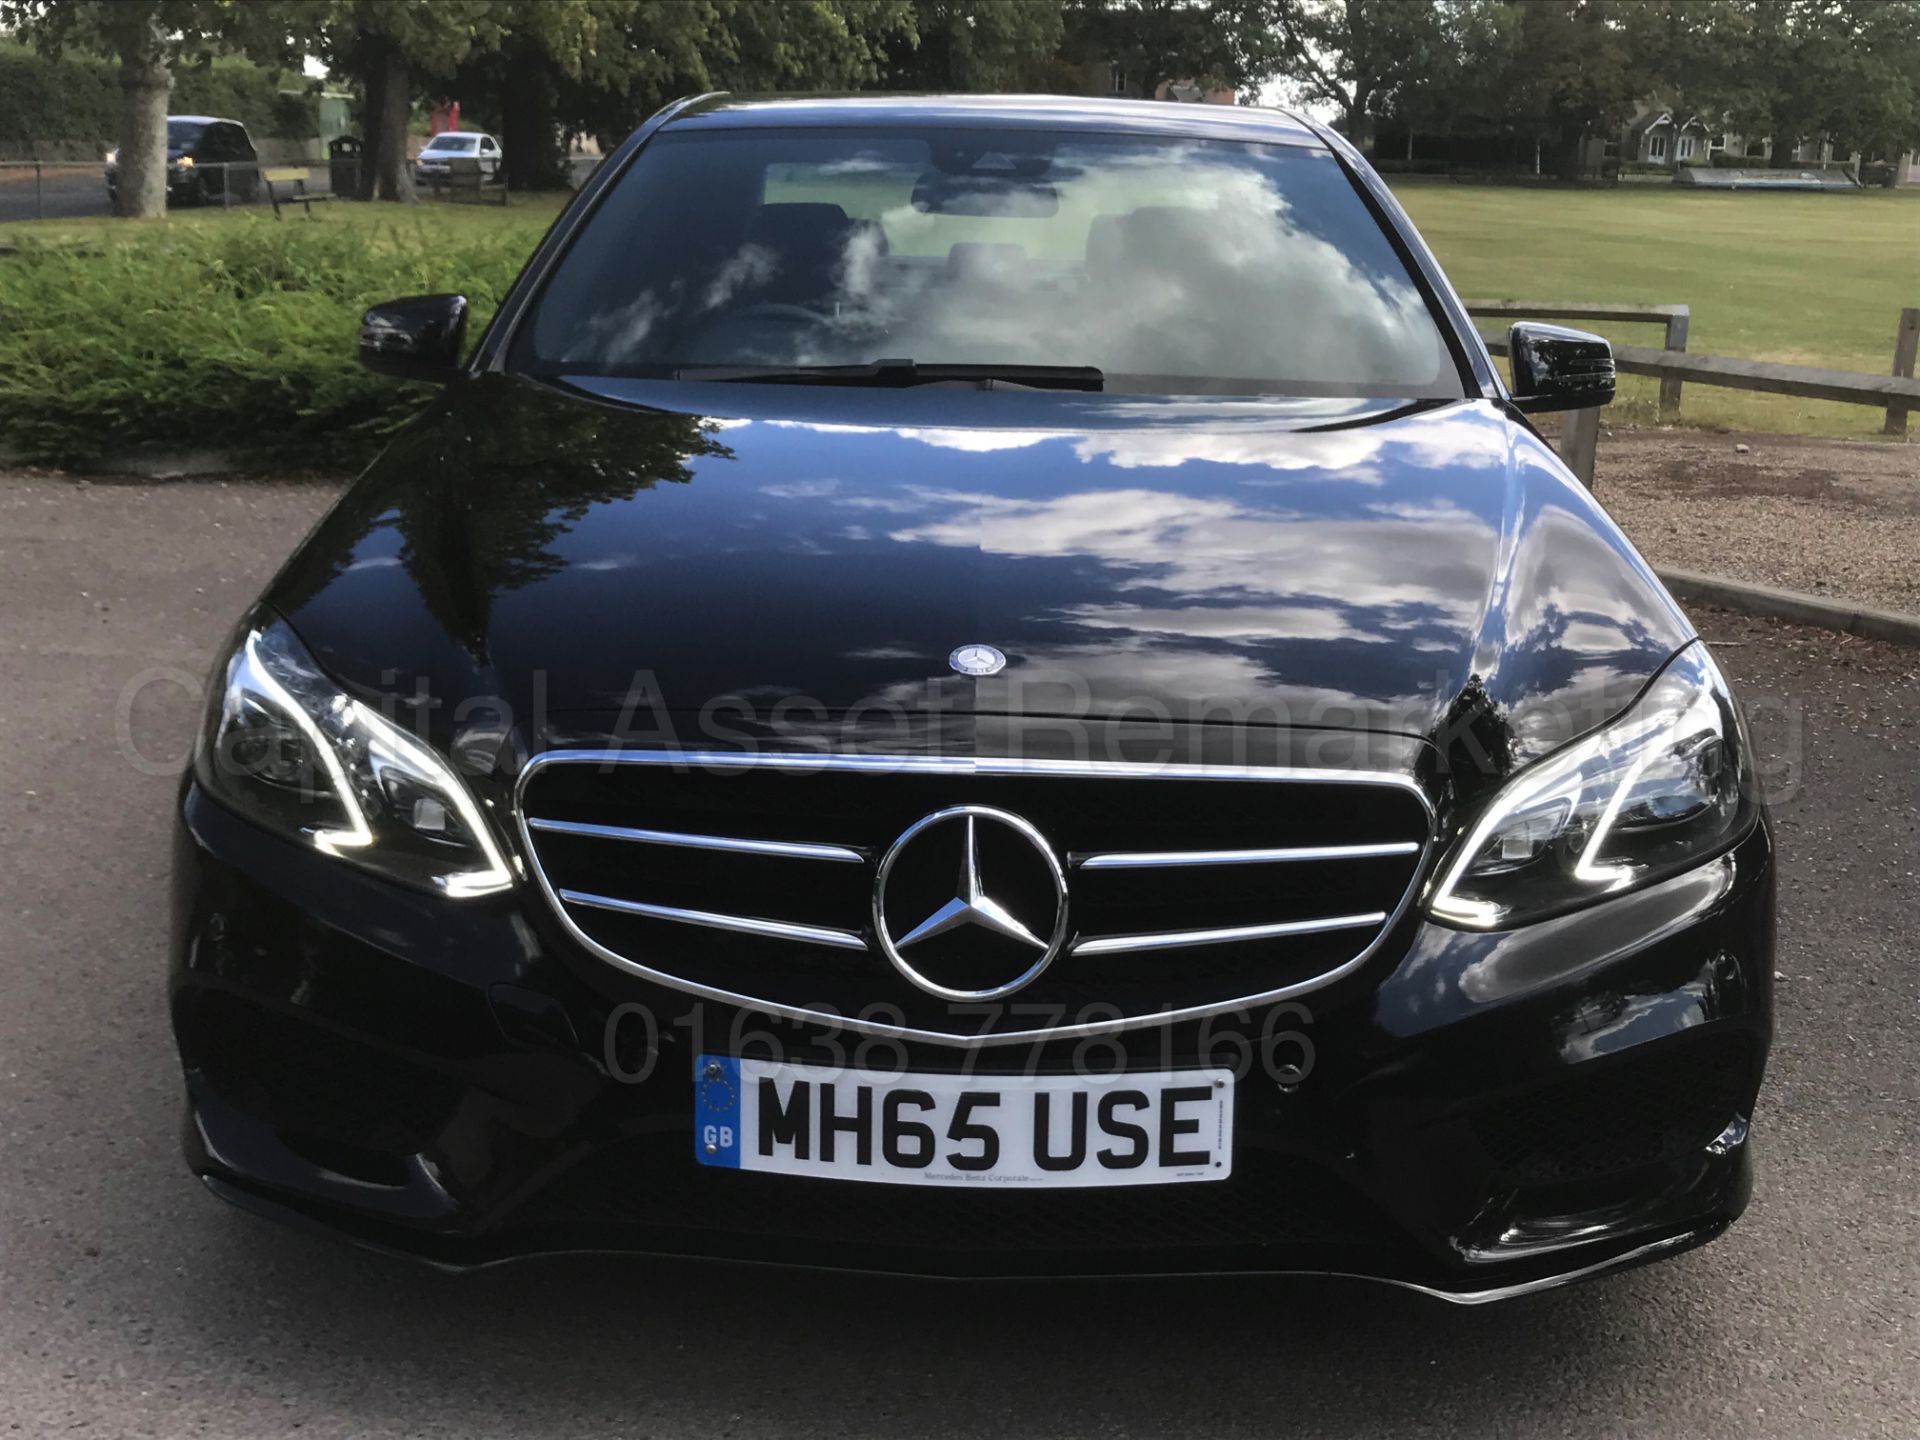 MERCEDES-BENZ E220D *AMG - NIGHT EDITION* SALOON (2016) '7G AUTO - LEATHER - SAT NAV' *LOW MILES* - Image 12 of 43